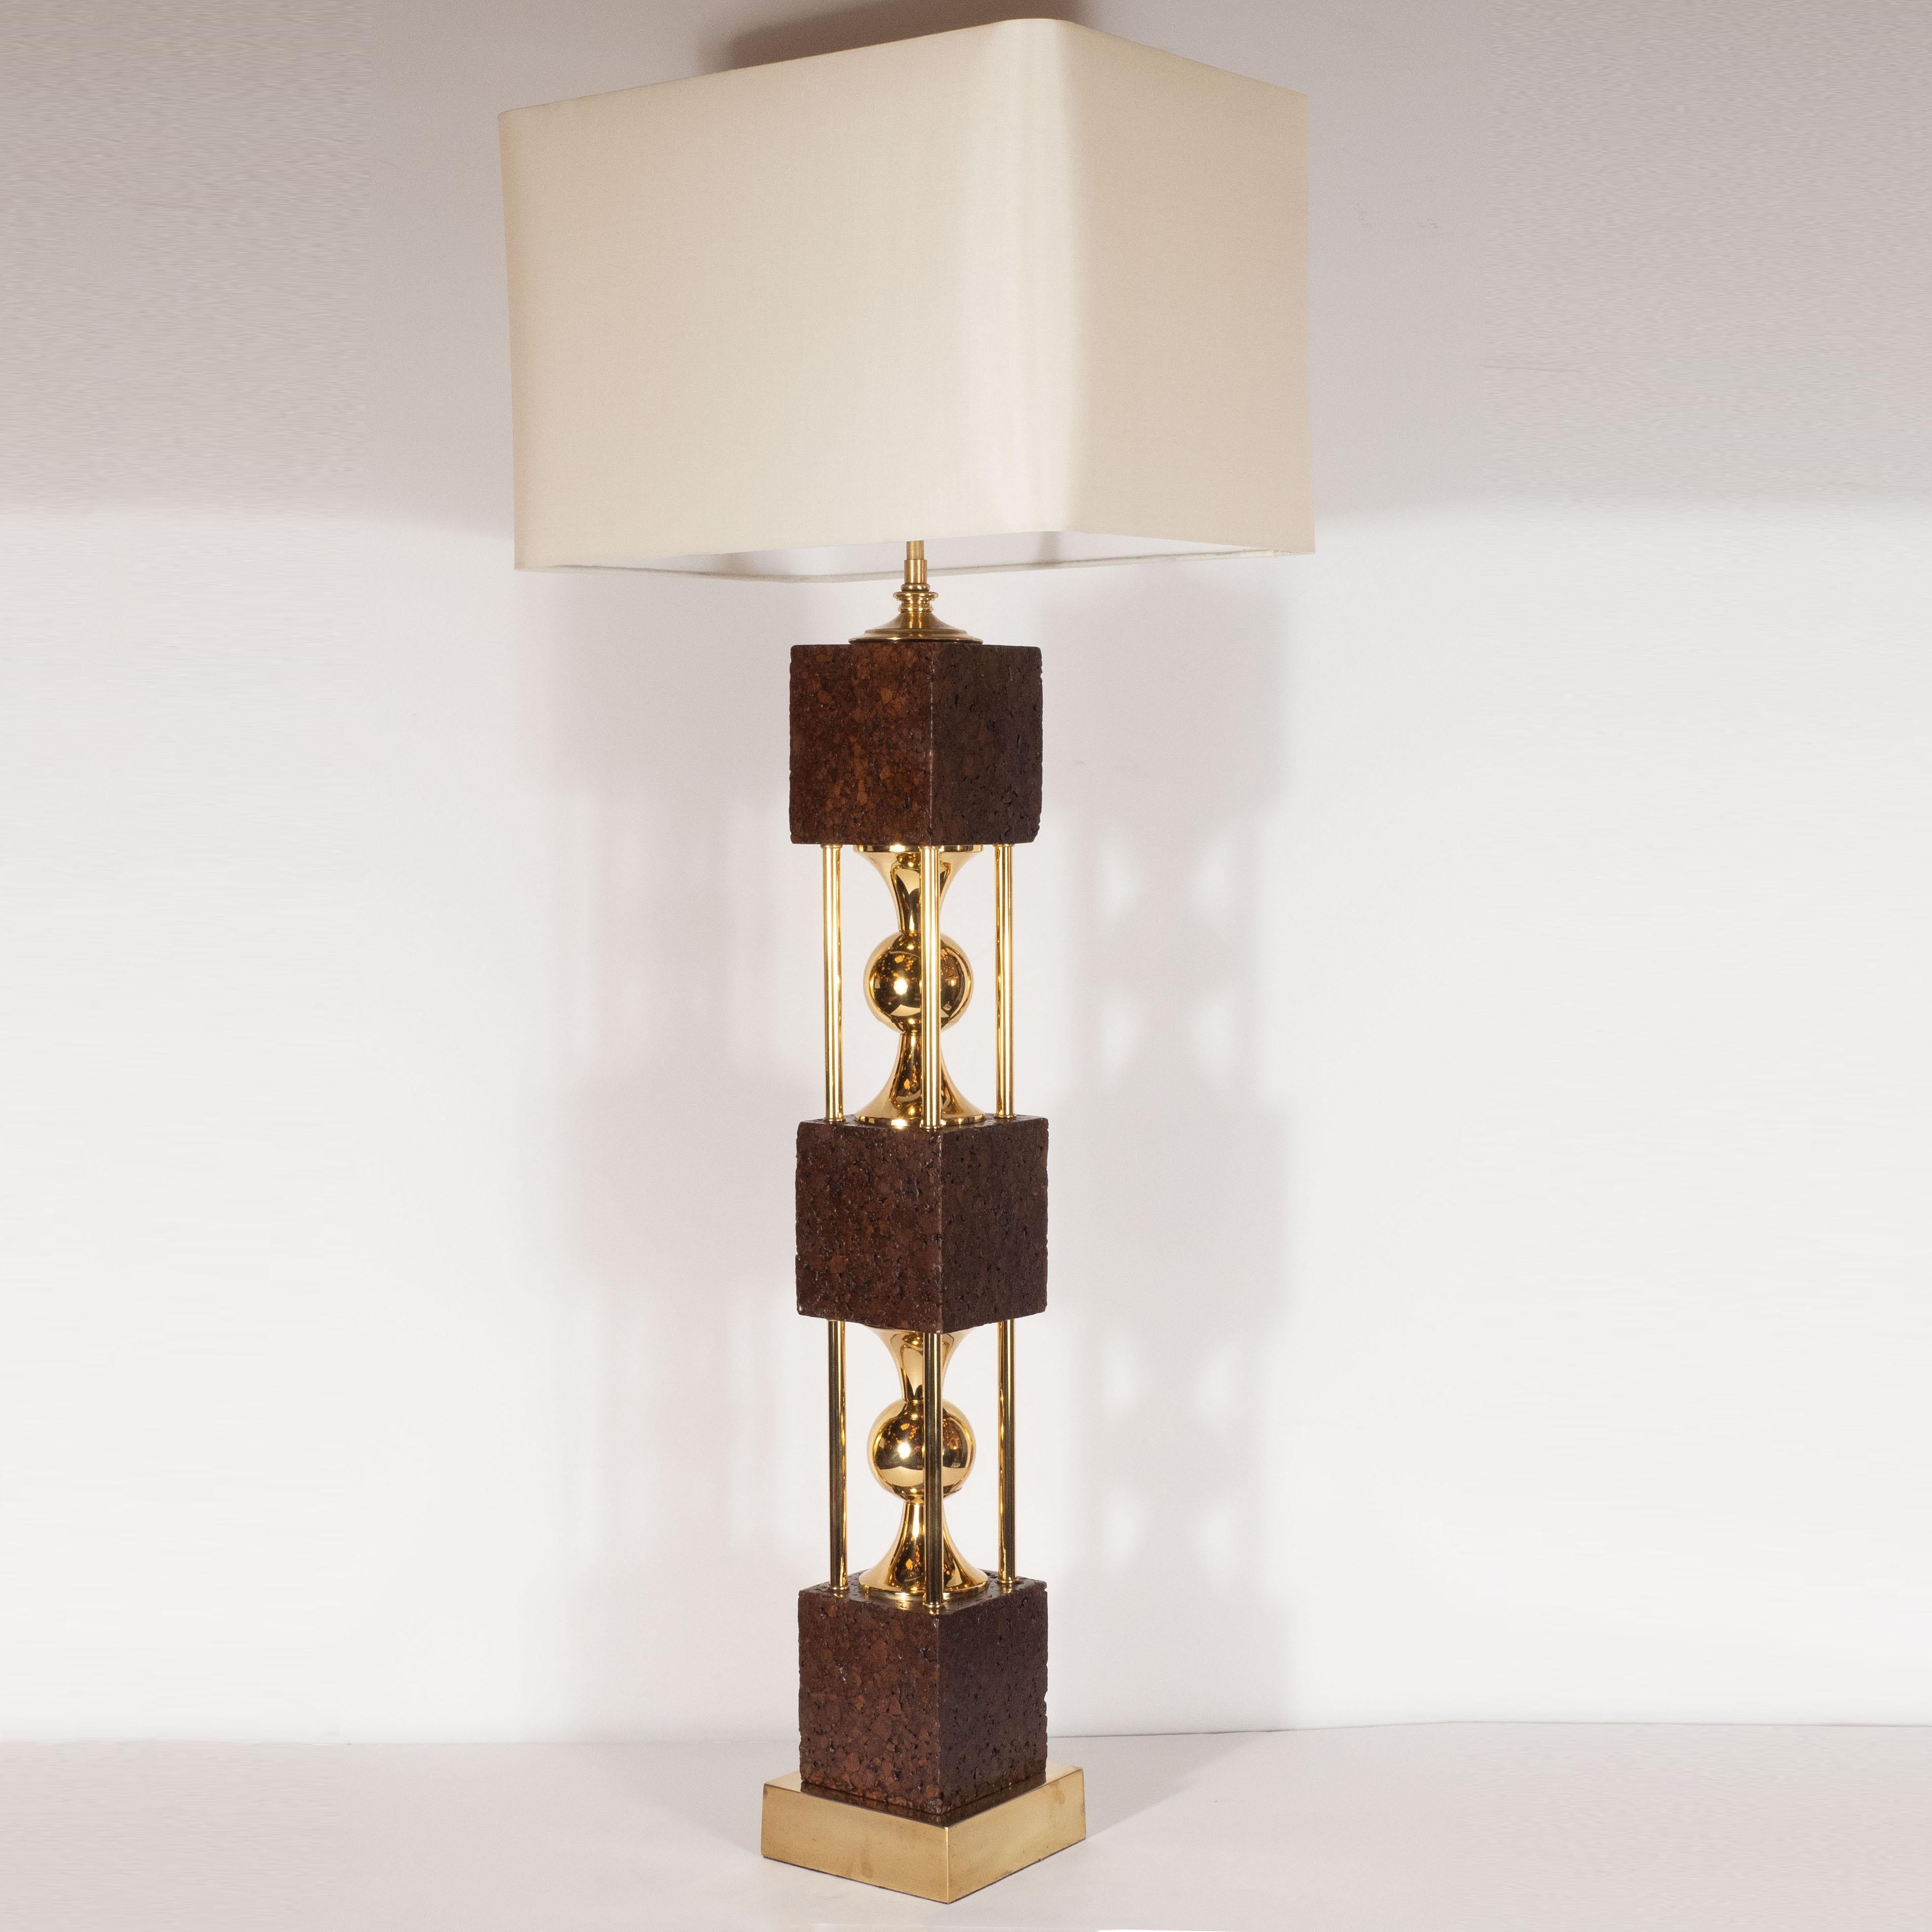 Mid-20th Century Pair of Sculptural Mid-Century Modern Polished Brass and Cork Table Lamps